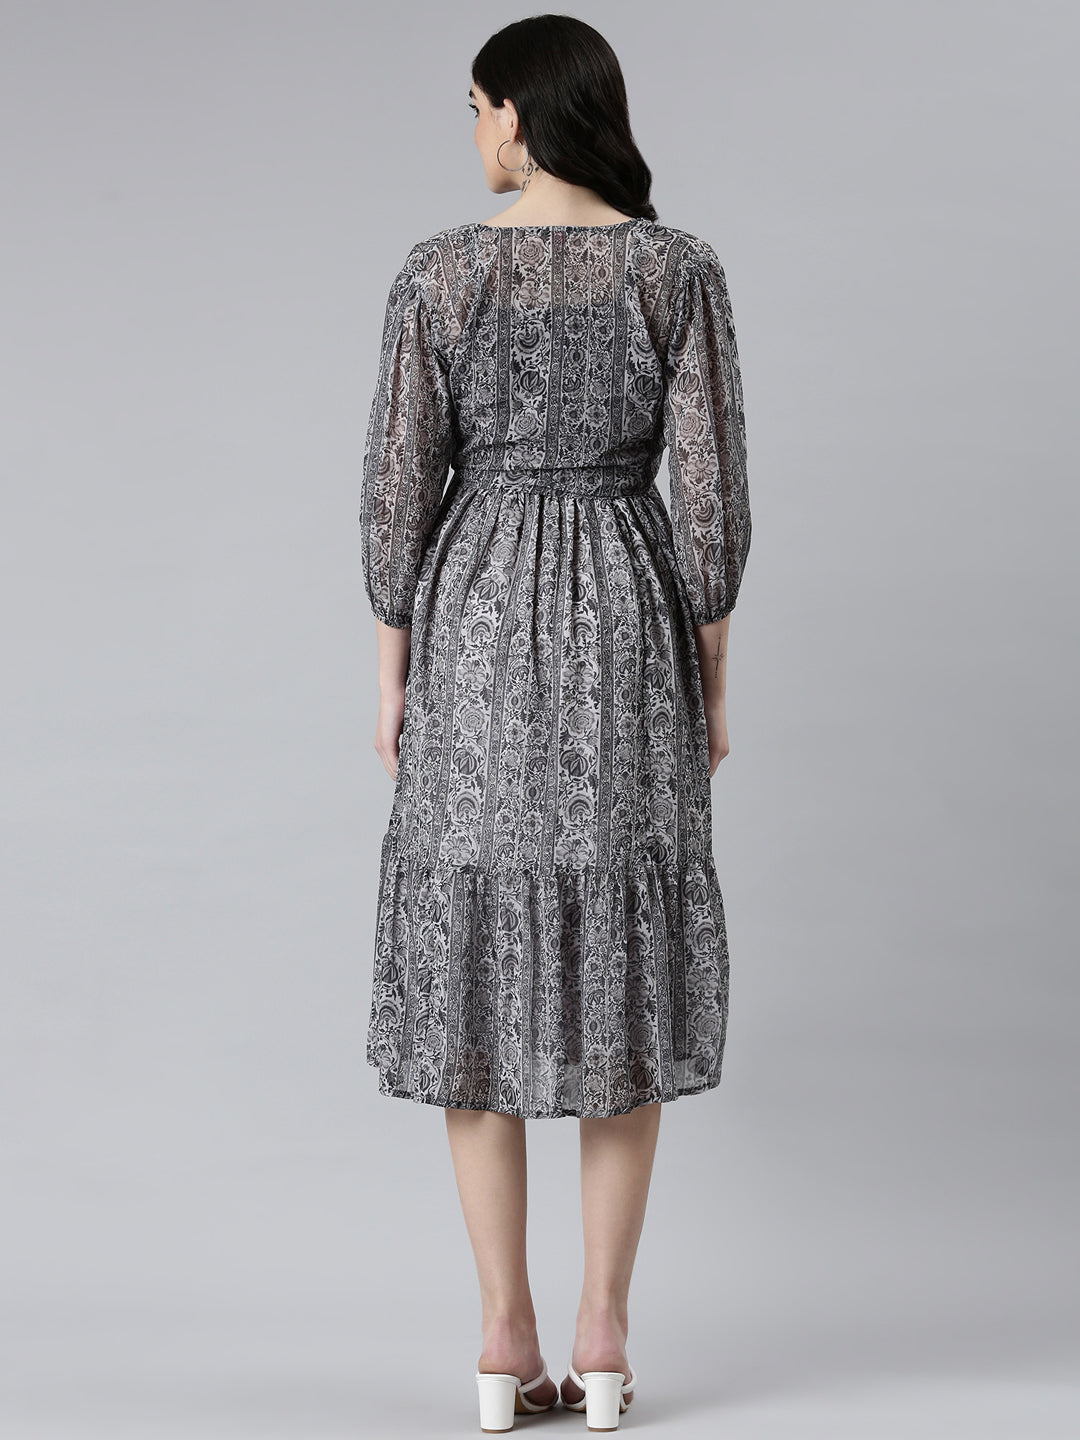 Women Grey Floral Fit and Flare Dress